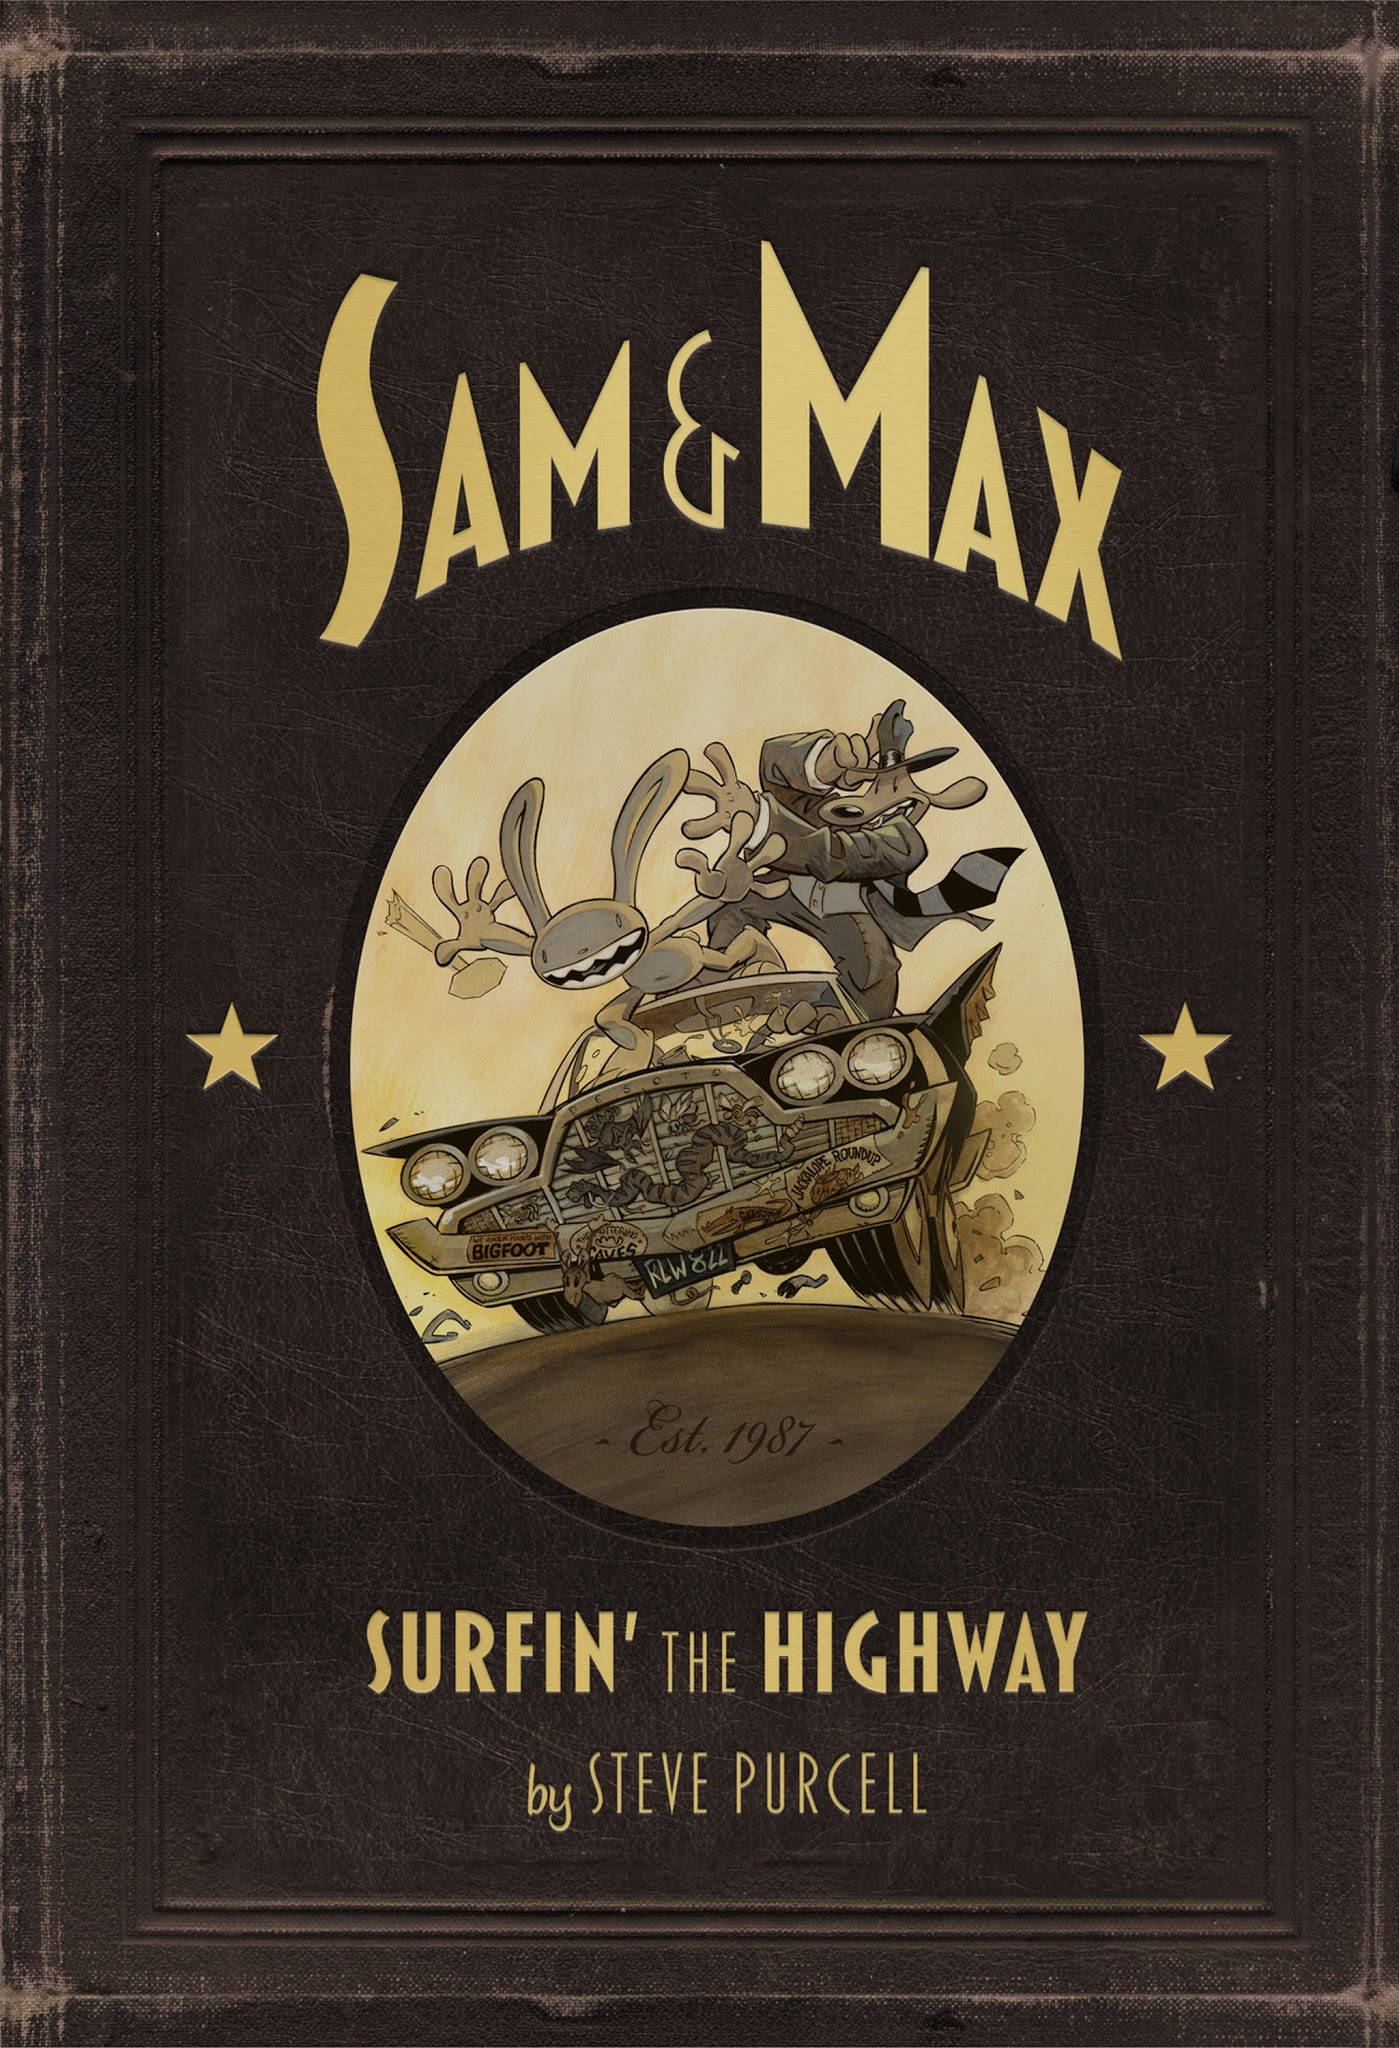 Read online Sam & Max Surfin' The Highway comic -  Issue # TPB - 1